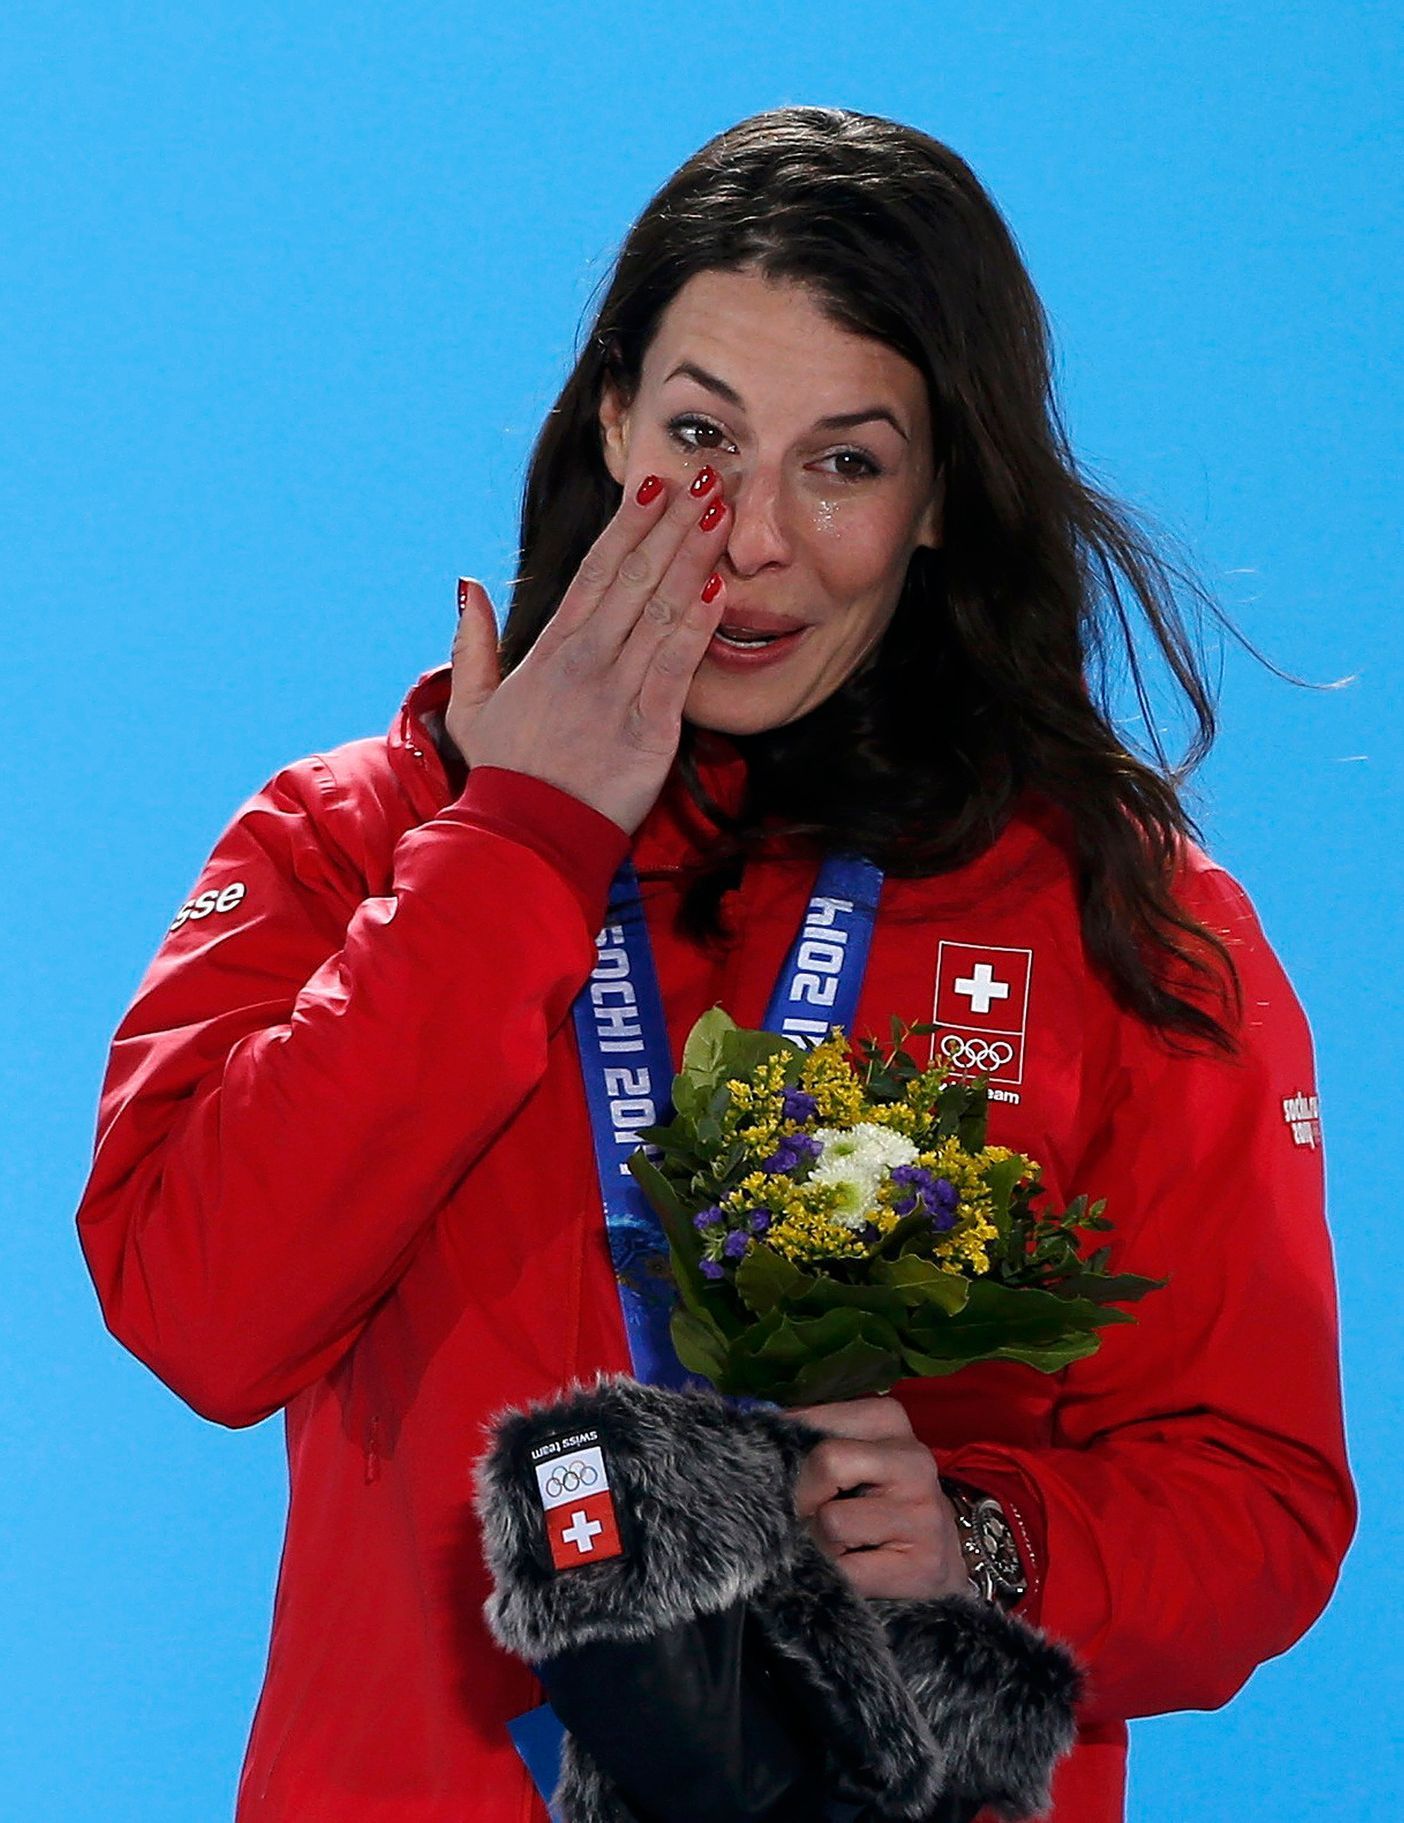 Gold medalist Switzerland's Gisin cries during the medal ceremony for the women's alpine skiing downhill race at the Sochi 2014 Winter Olympic Games in Sochi